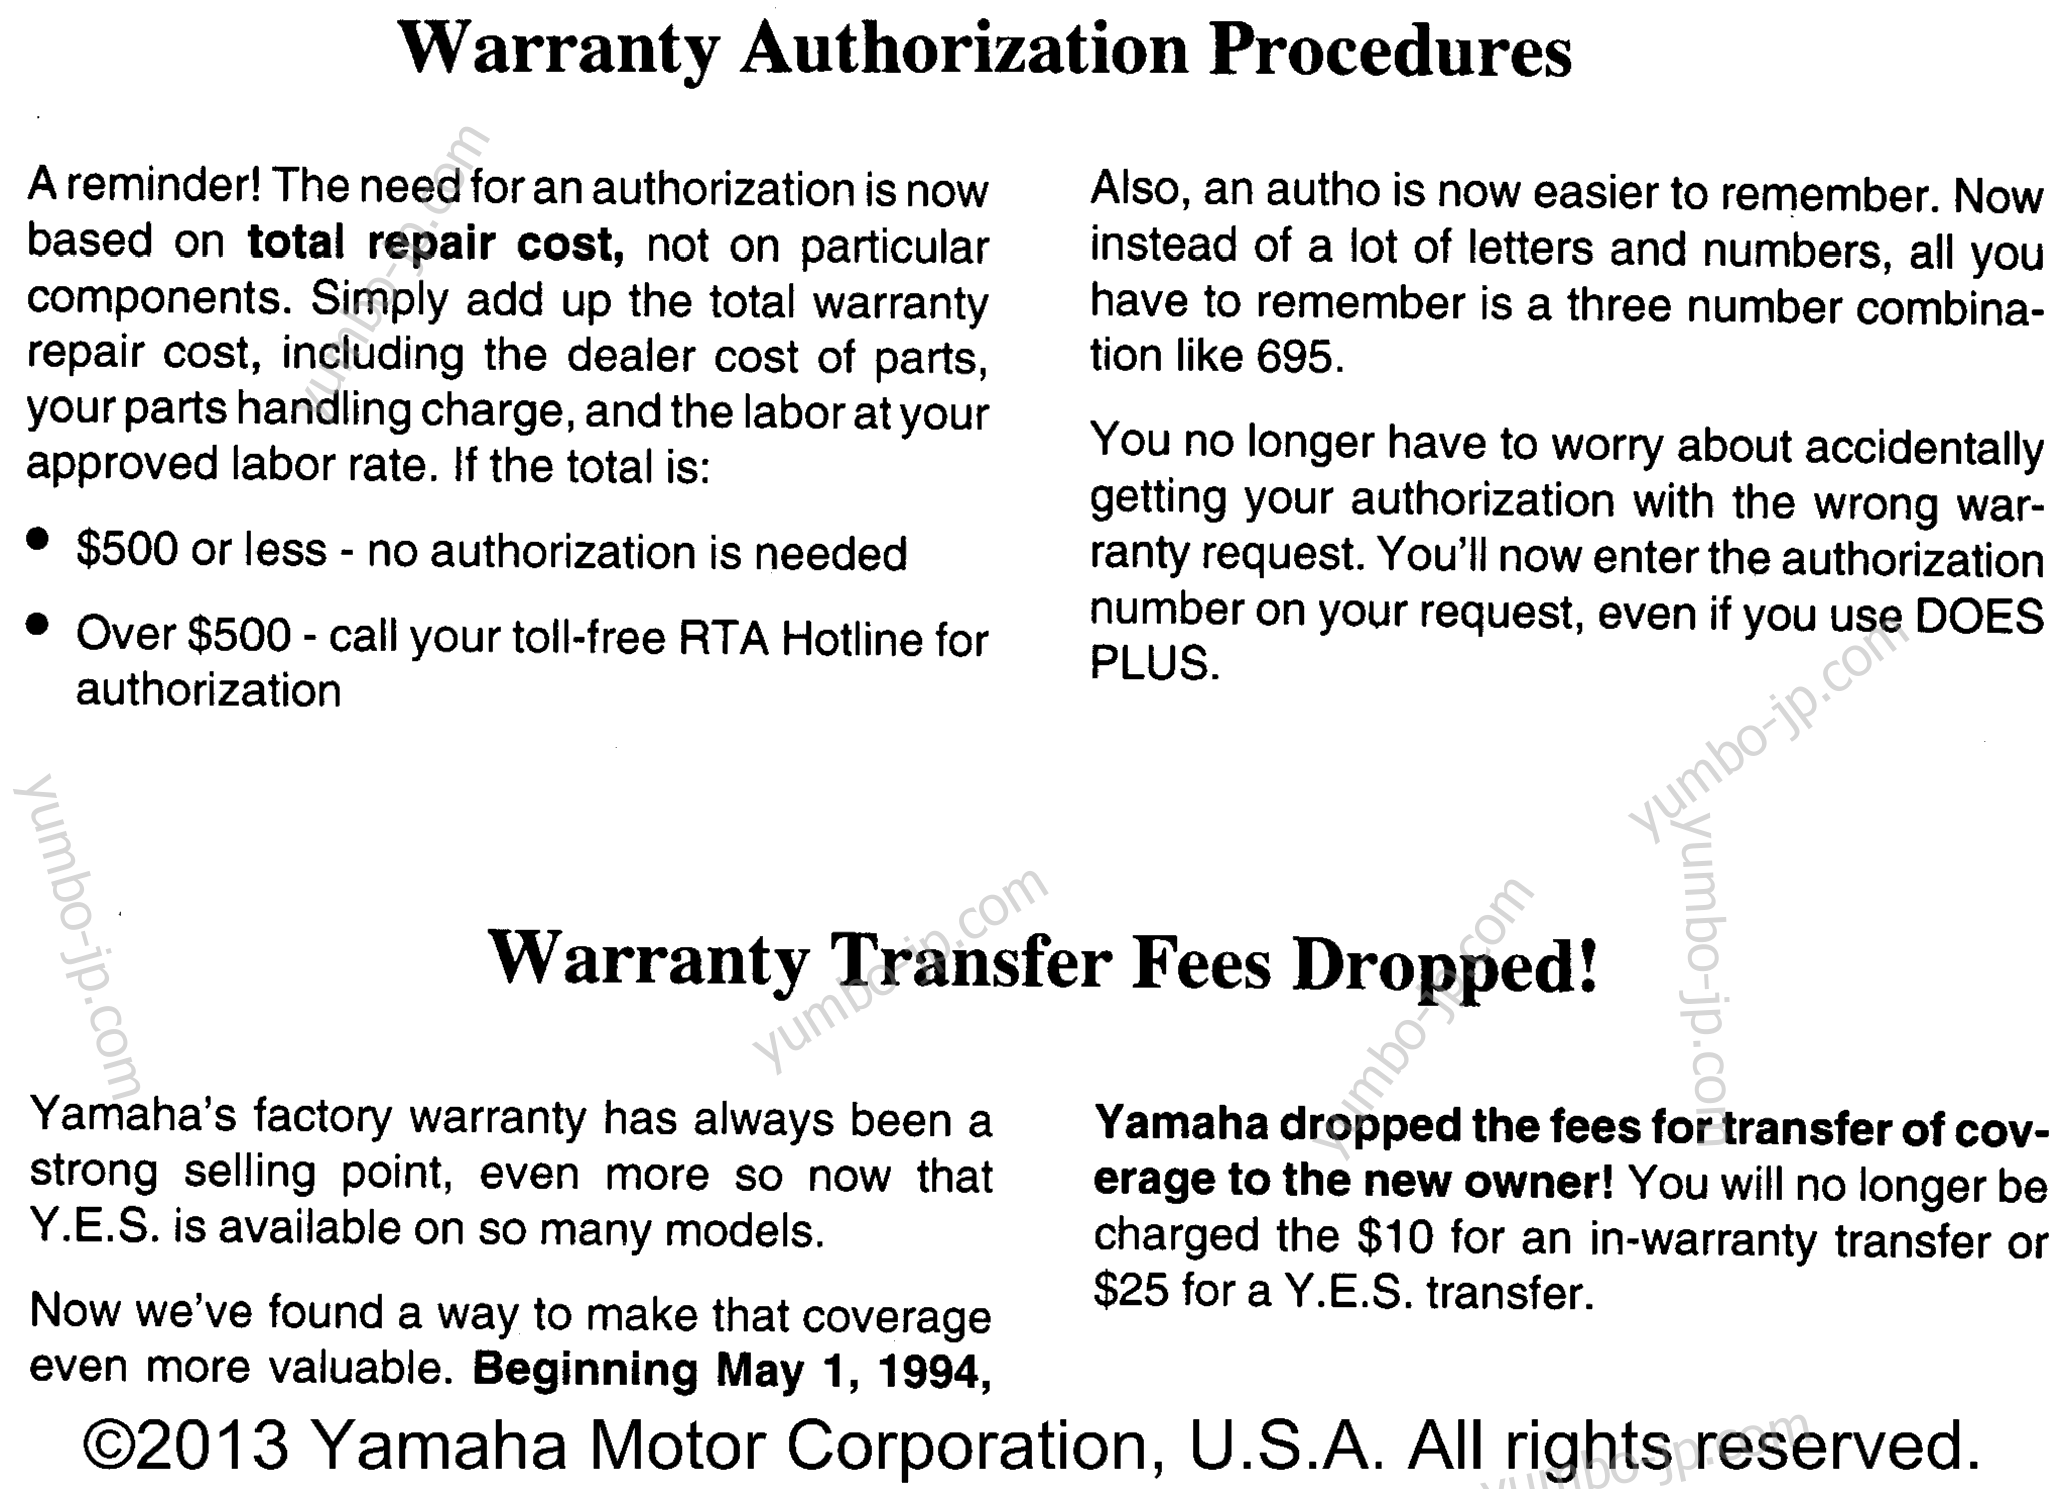 Audio Warranty Service Pg 1 for motorcycles YAMAHA YZF600RG 1995 year